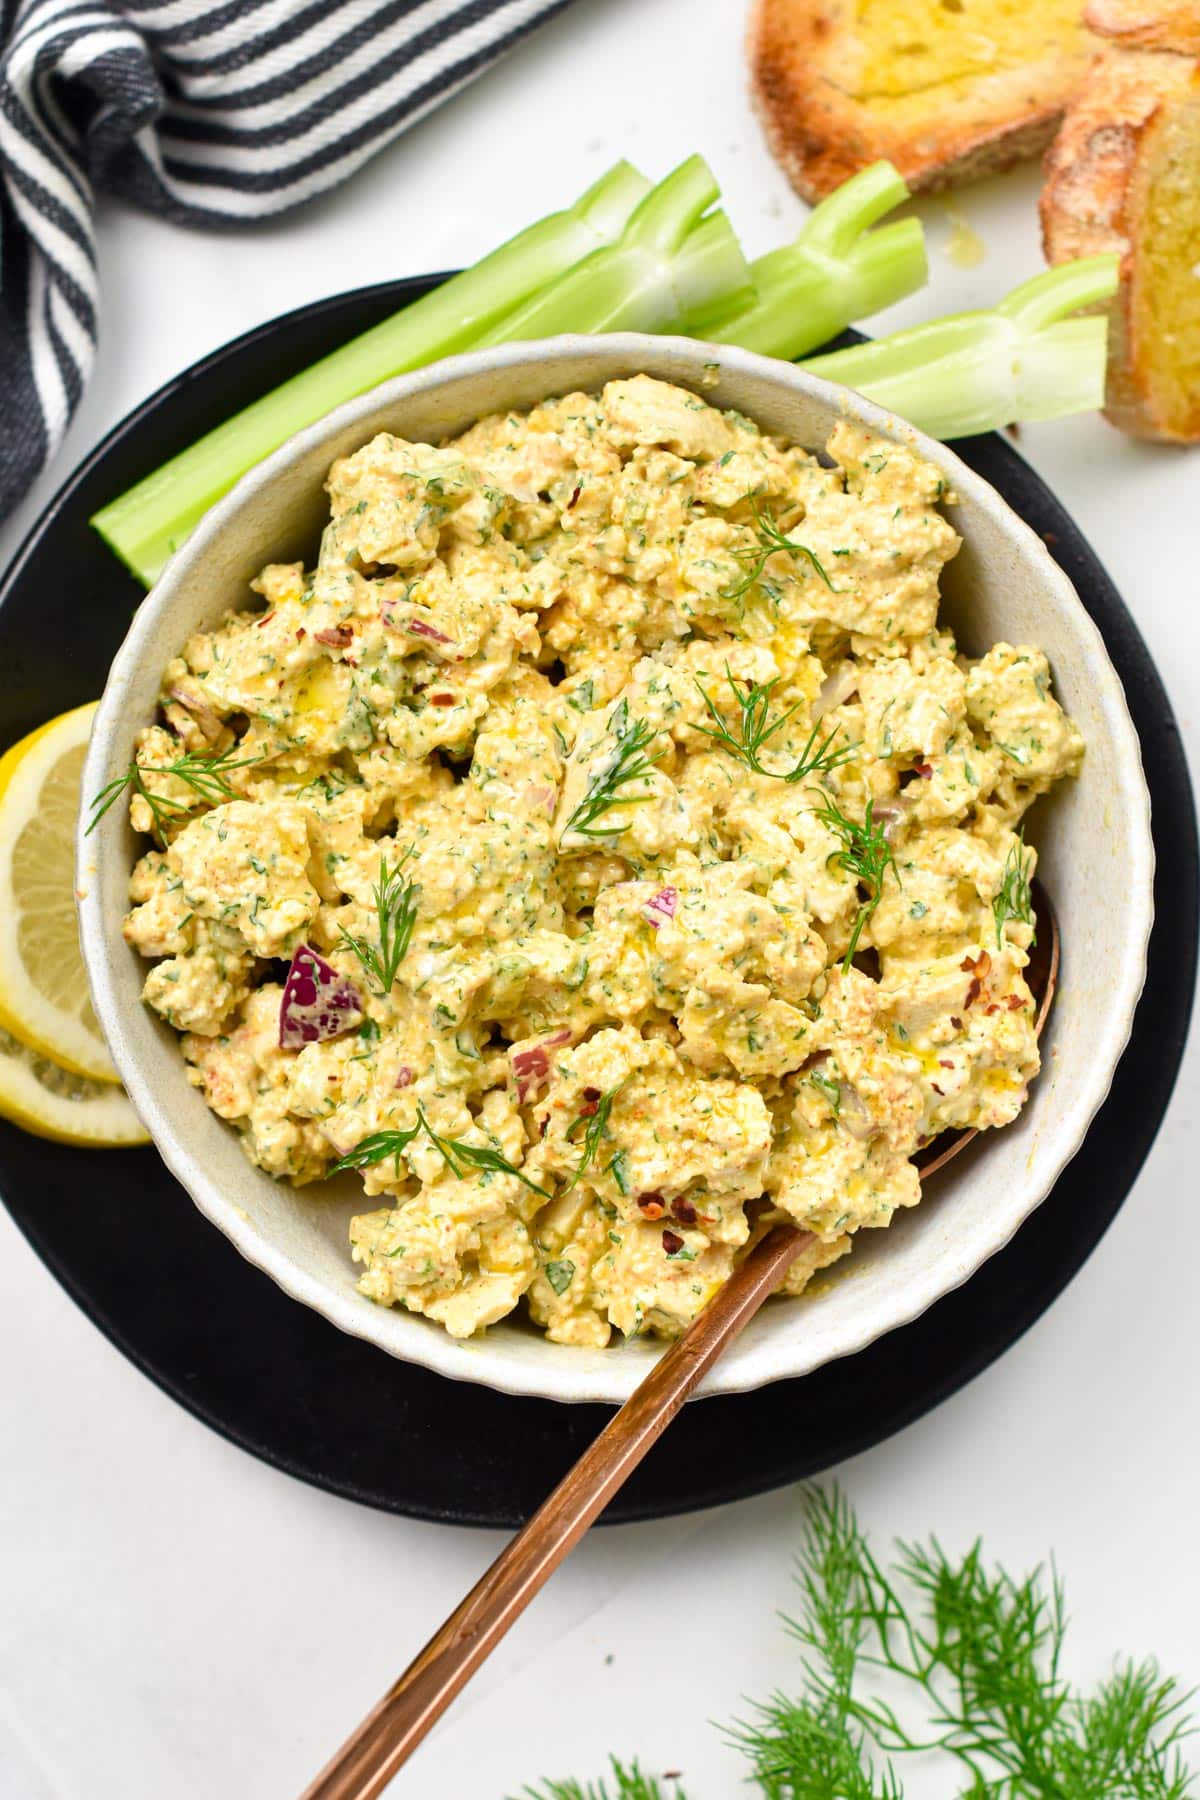 This Tofu Egg Salad is a high-protein meal perfect to make tofu sandwich or fill lettuce cups for a low-carb vegan dinner. 